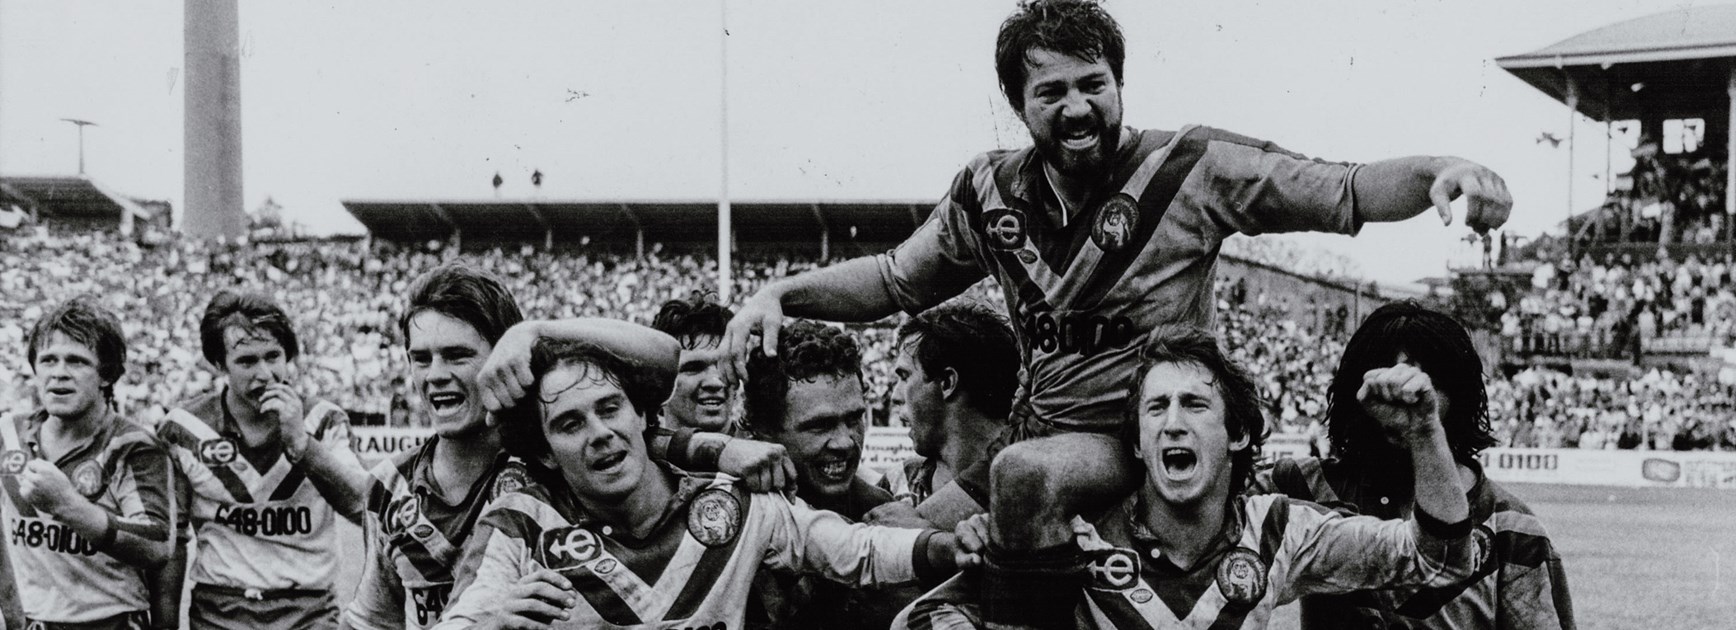 1980 grand final rewind: Gearin's try for the ages ices Bulldogs title